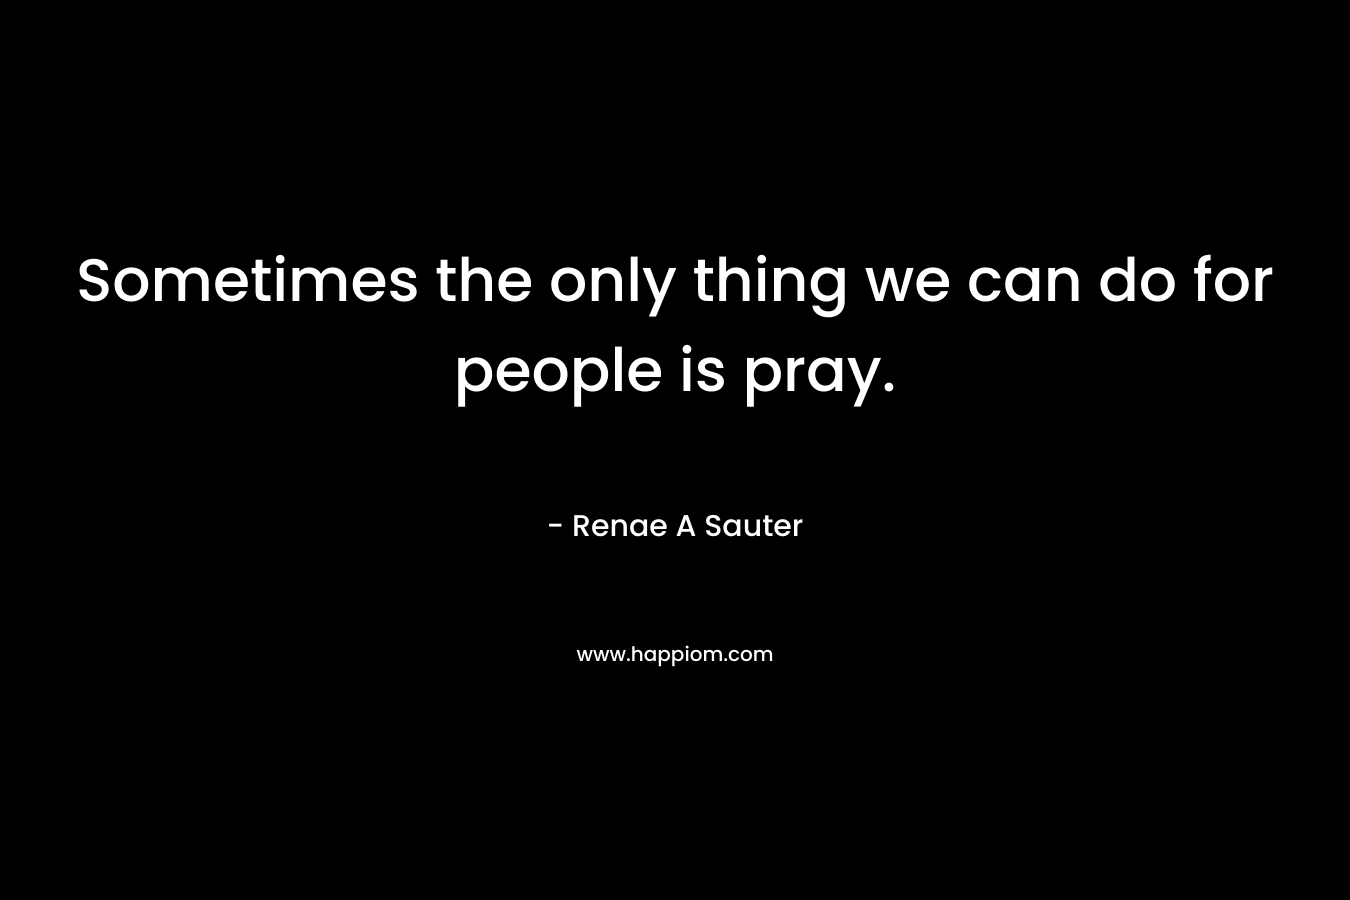 Sometimes the only thing we can do for people is pray.